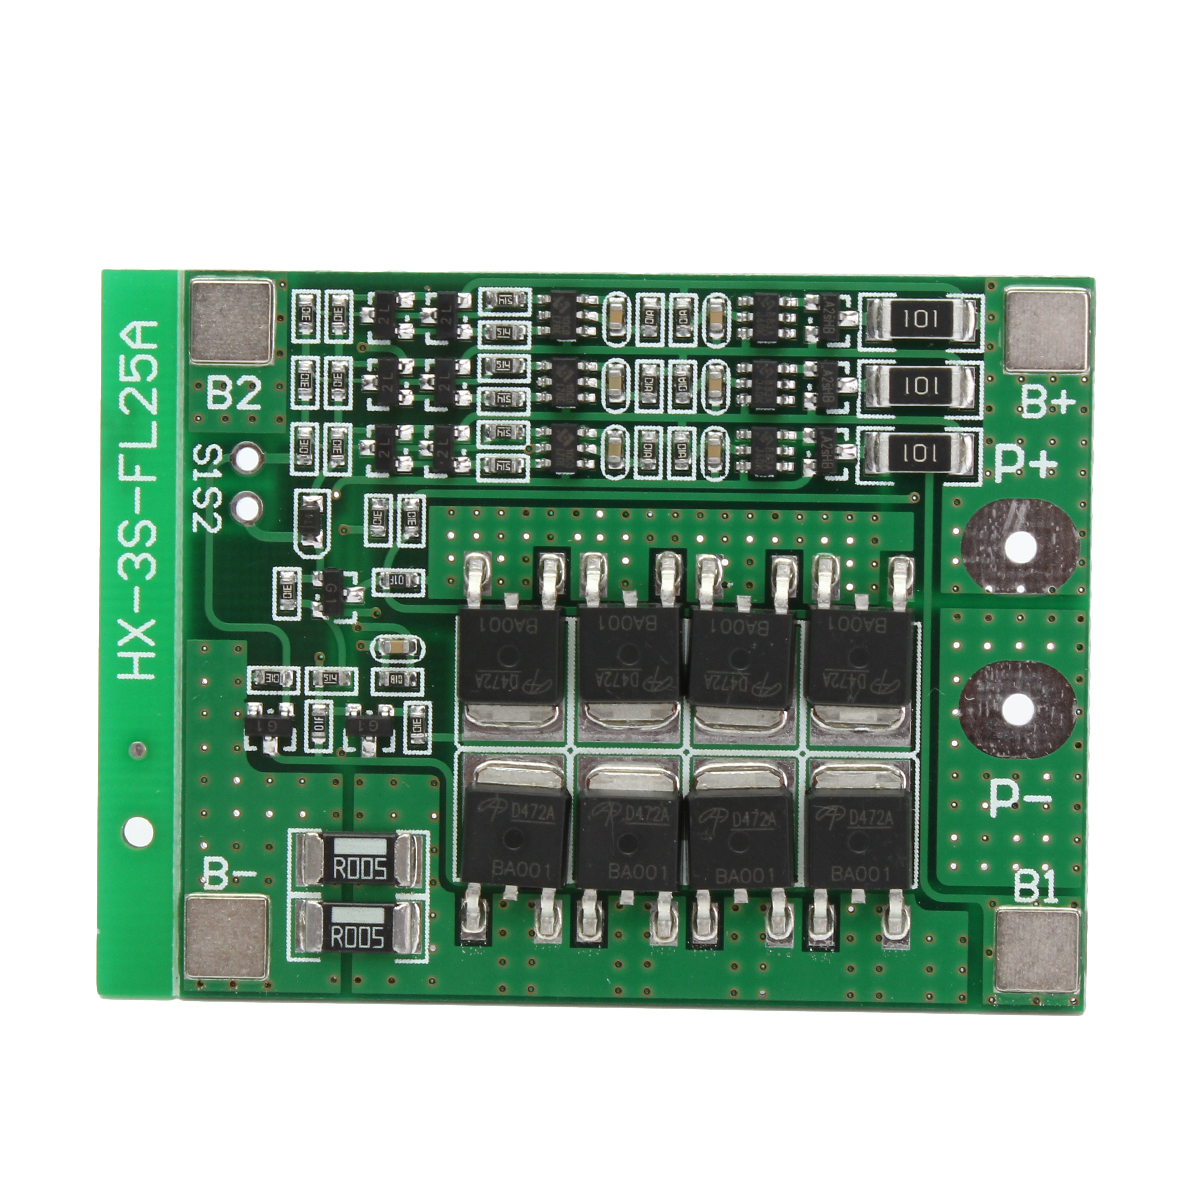 10pcs-3S-111V-25A-18650-Li-ion-Lithium-Battery-BMS-Protection-PCB-Board-With-Balance-Function-1388428